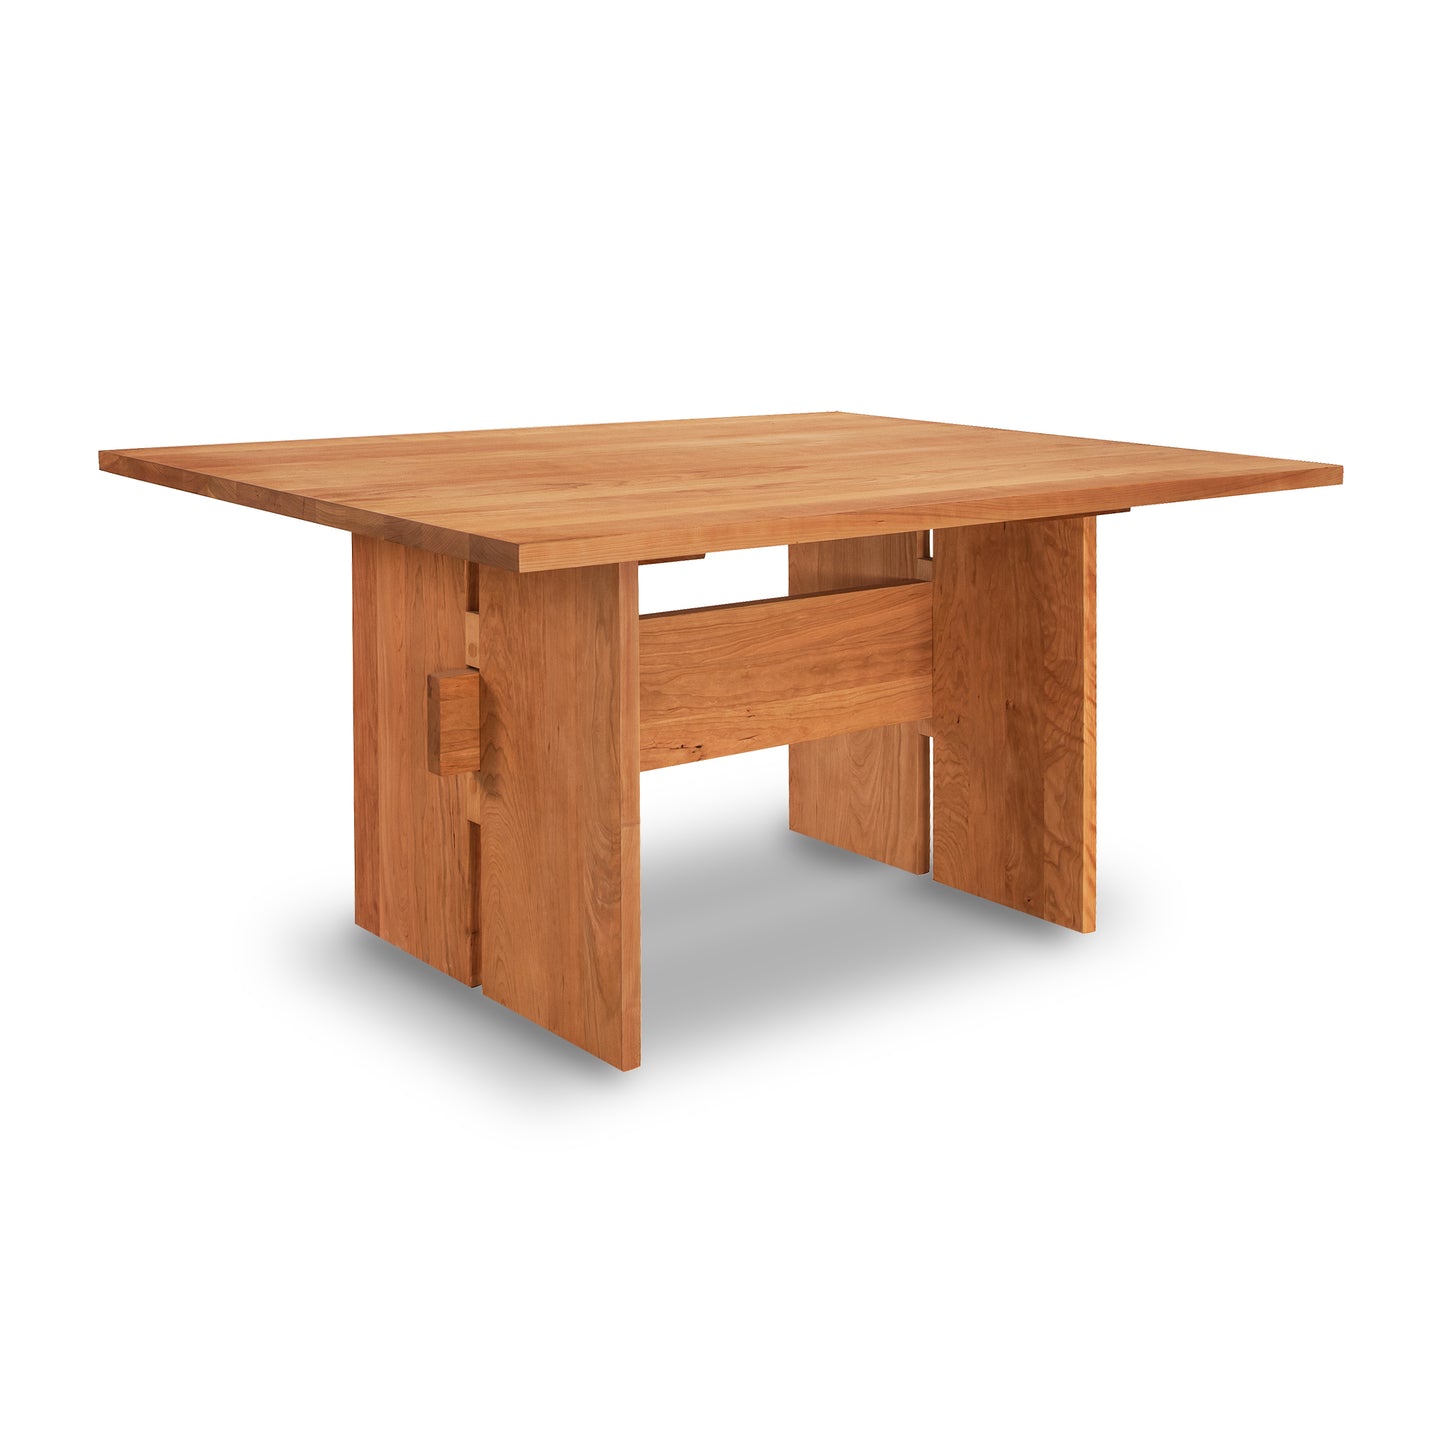 Modern American Dining Table by Vermont Furniture Designs - rectangular solid wood dining table with smooth surface and sturdy legs, eco-friendly finish, minimalist design, handcrafted American made furniture quality.